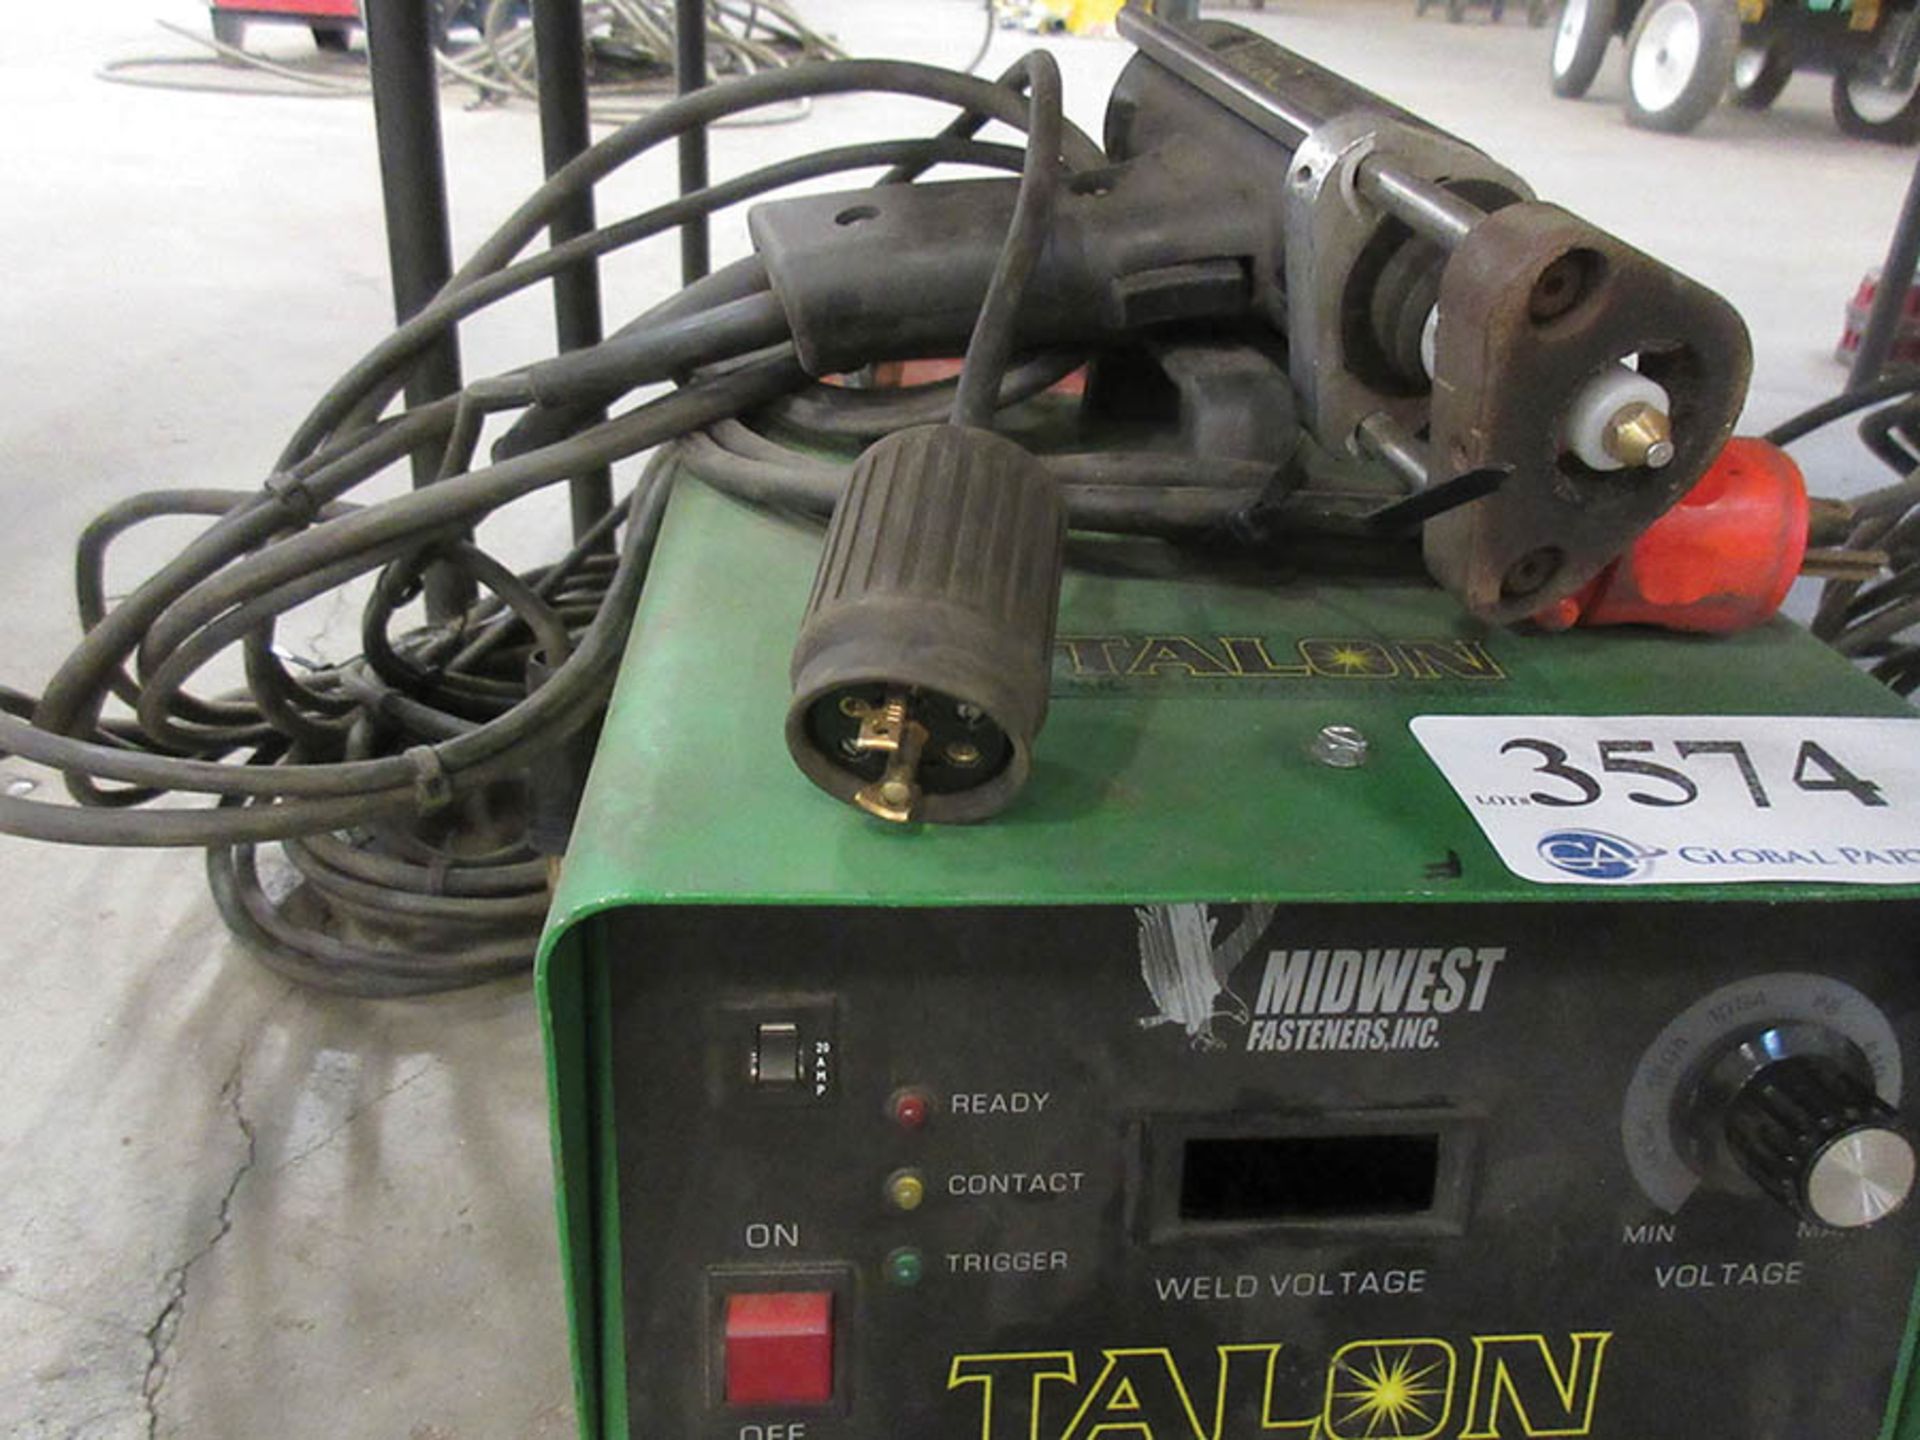 MISWEST TALON STUD WELDING SYSTEM WITH (1) GUN (UNIT NEEDS NEW DISPLAY AND GUN NEEDS NEW PLUG) - Image 3 of 3